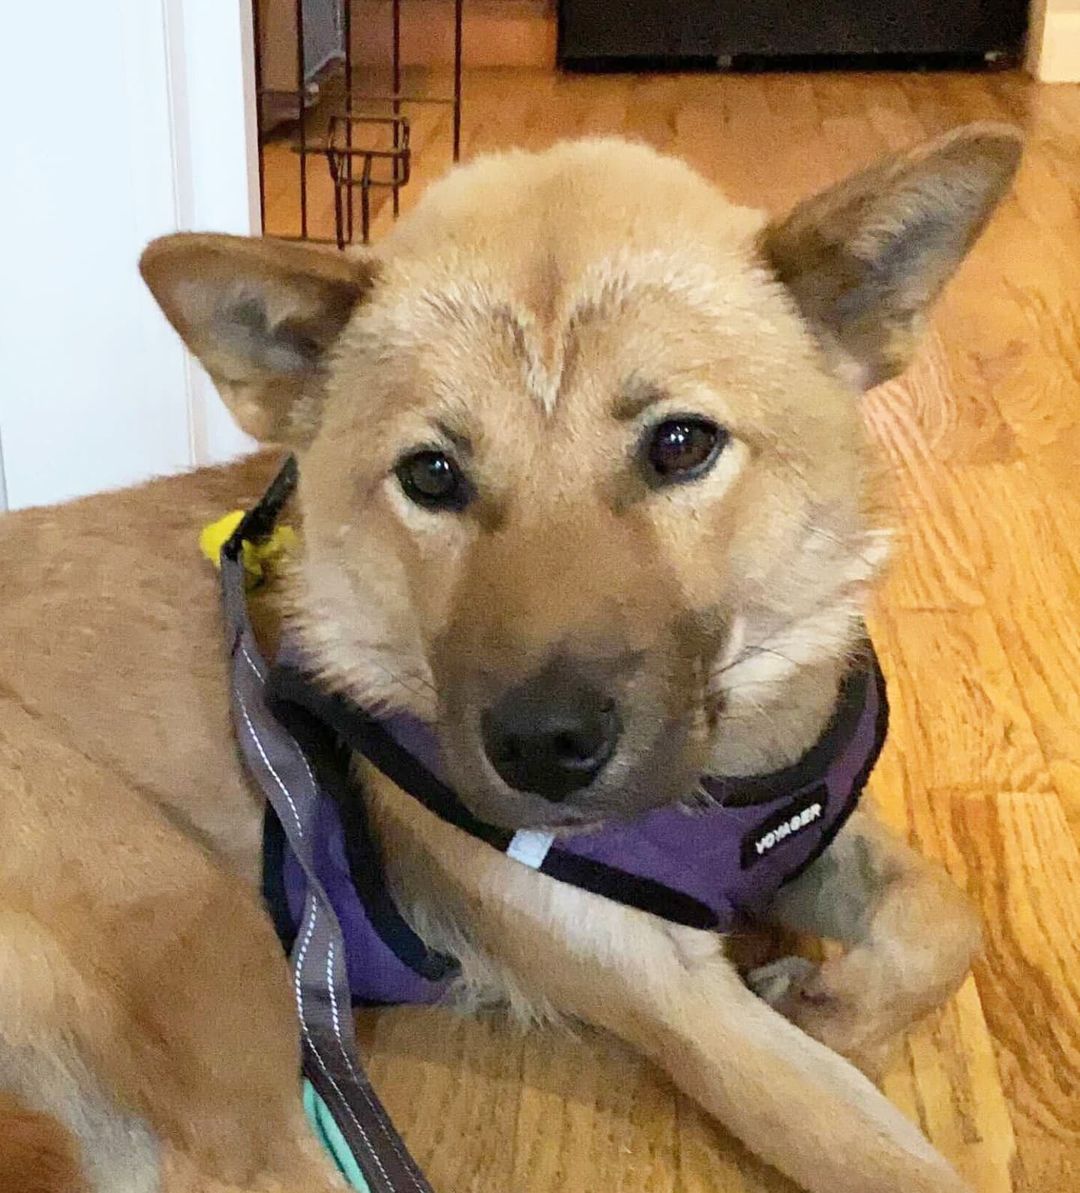 Meet our good boy Bulgari! 💎 He’s a 2-year-old Jindo mix and weighs about 31 pounds. Bulgari was rescued by our partner @animal_kara from Uijeongbu, a dog training center run more like a death camp. He’s best described as friendly, easy-going, smart, calm, and sweet. Bulgari is fully crate trained and working on potty training. He appreciates a good head scritch, and his favorite treat is cheese. 🧀 We think his ideal adopter would be an active person who enjoys jogging or running with Bulgari and can help him build confidence. Could that be you? Apply to adopt!

🐕 On a case-by-case basis, we accept applications from residents living within 30-miles of NYC and certain areas within CT, PA, D.C., MD, and MA. Check koreank9rescue.org/adopt for more details! 📝⁠⁠⁠⁠⁠⁠⁠⁠⁠⁠⁠⁠⁠

<a target='_blank' href='https://www.instagram.com/explore/tags/jindo/'>#jindo</a> <a target='_blank' href='https://www.instagram.com/explore/tags/adoptmenyc/'>#adoptmenyc</a> <a target='_blank' href='https://www.instagram.com/explore/tags/nyc/'>#nyc</a> <a target='_blank' href='https://www.instagram.com/explore/tags/korea/'>#korea</a> <a target='_blank' href='https://www.instagram.com/explore/tags/adoptme/'>#adoptme</a> <a target='_blank' href='https://www.instagram.com/explore/tags/adoptmeplease/'>#adoptmeplease</a> <a target='_blank' href='https://www.instagram.com/explore/tags/koreank9rescue/'>#koreank9rescue</a> <a target='_blank' href='https://www.instagram.com/explore/tags/kk9r/'>#kk9r</a> <a target='_blank' href='https://www.instagram.com/explore/tags/spay/'>#spay</a> <a target='_blank' href='https://www.instagram.com/explore/tags/neuter/'>#neuter</a> <a target='_blank' href='https://www.instagram.com/explore/tags/rescueismyfavoritebreed/'>#rescueismyfavoritebreed</a> <a target='_blank' href='https://www.instagram.com/explore/tags/rescuedog/'>#rescuedog</a> <a target='_blank' href='https://www.instagram.com/explore/tags/everydogdeserveslove/'>#everydogdeserveslove</a> <a target='_blank' href='https://www.instagram.com/explore/tags/showlovekorea/'>#showlovekorea</a>